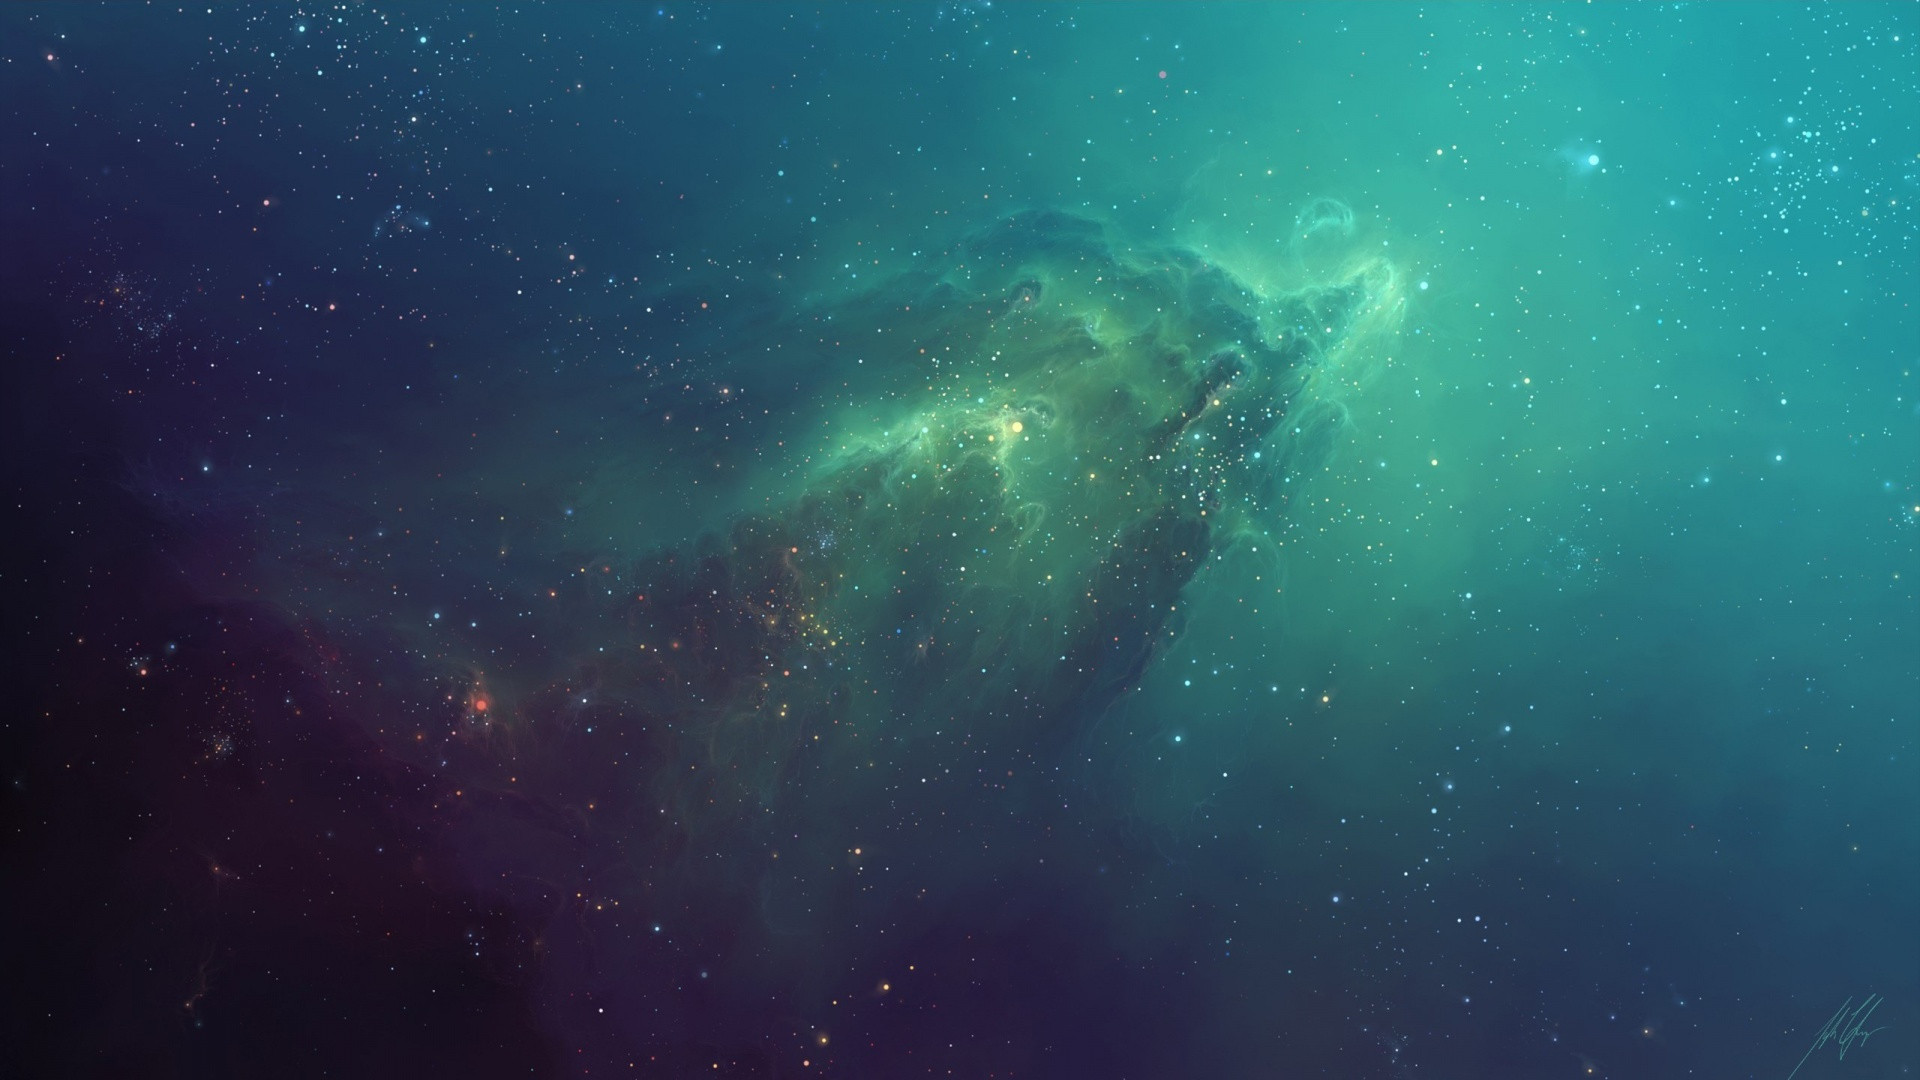 Anyone else a fan of the iOS 7 Nebula wallpaper I created a full res 1920x1080